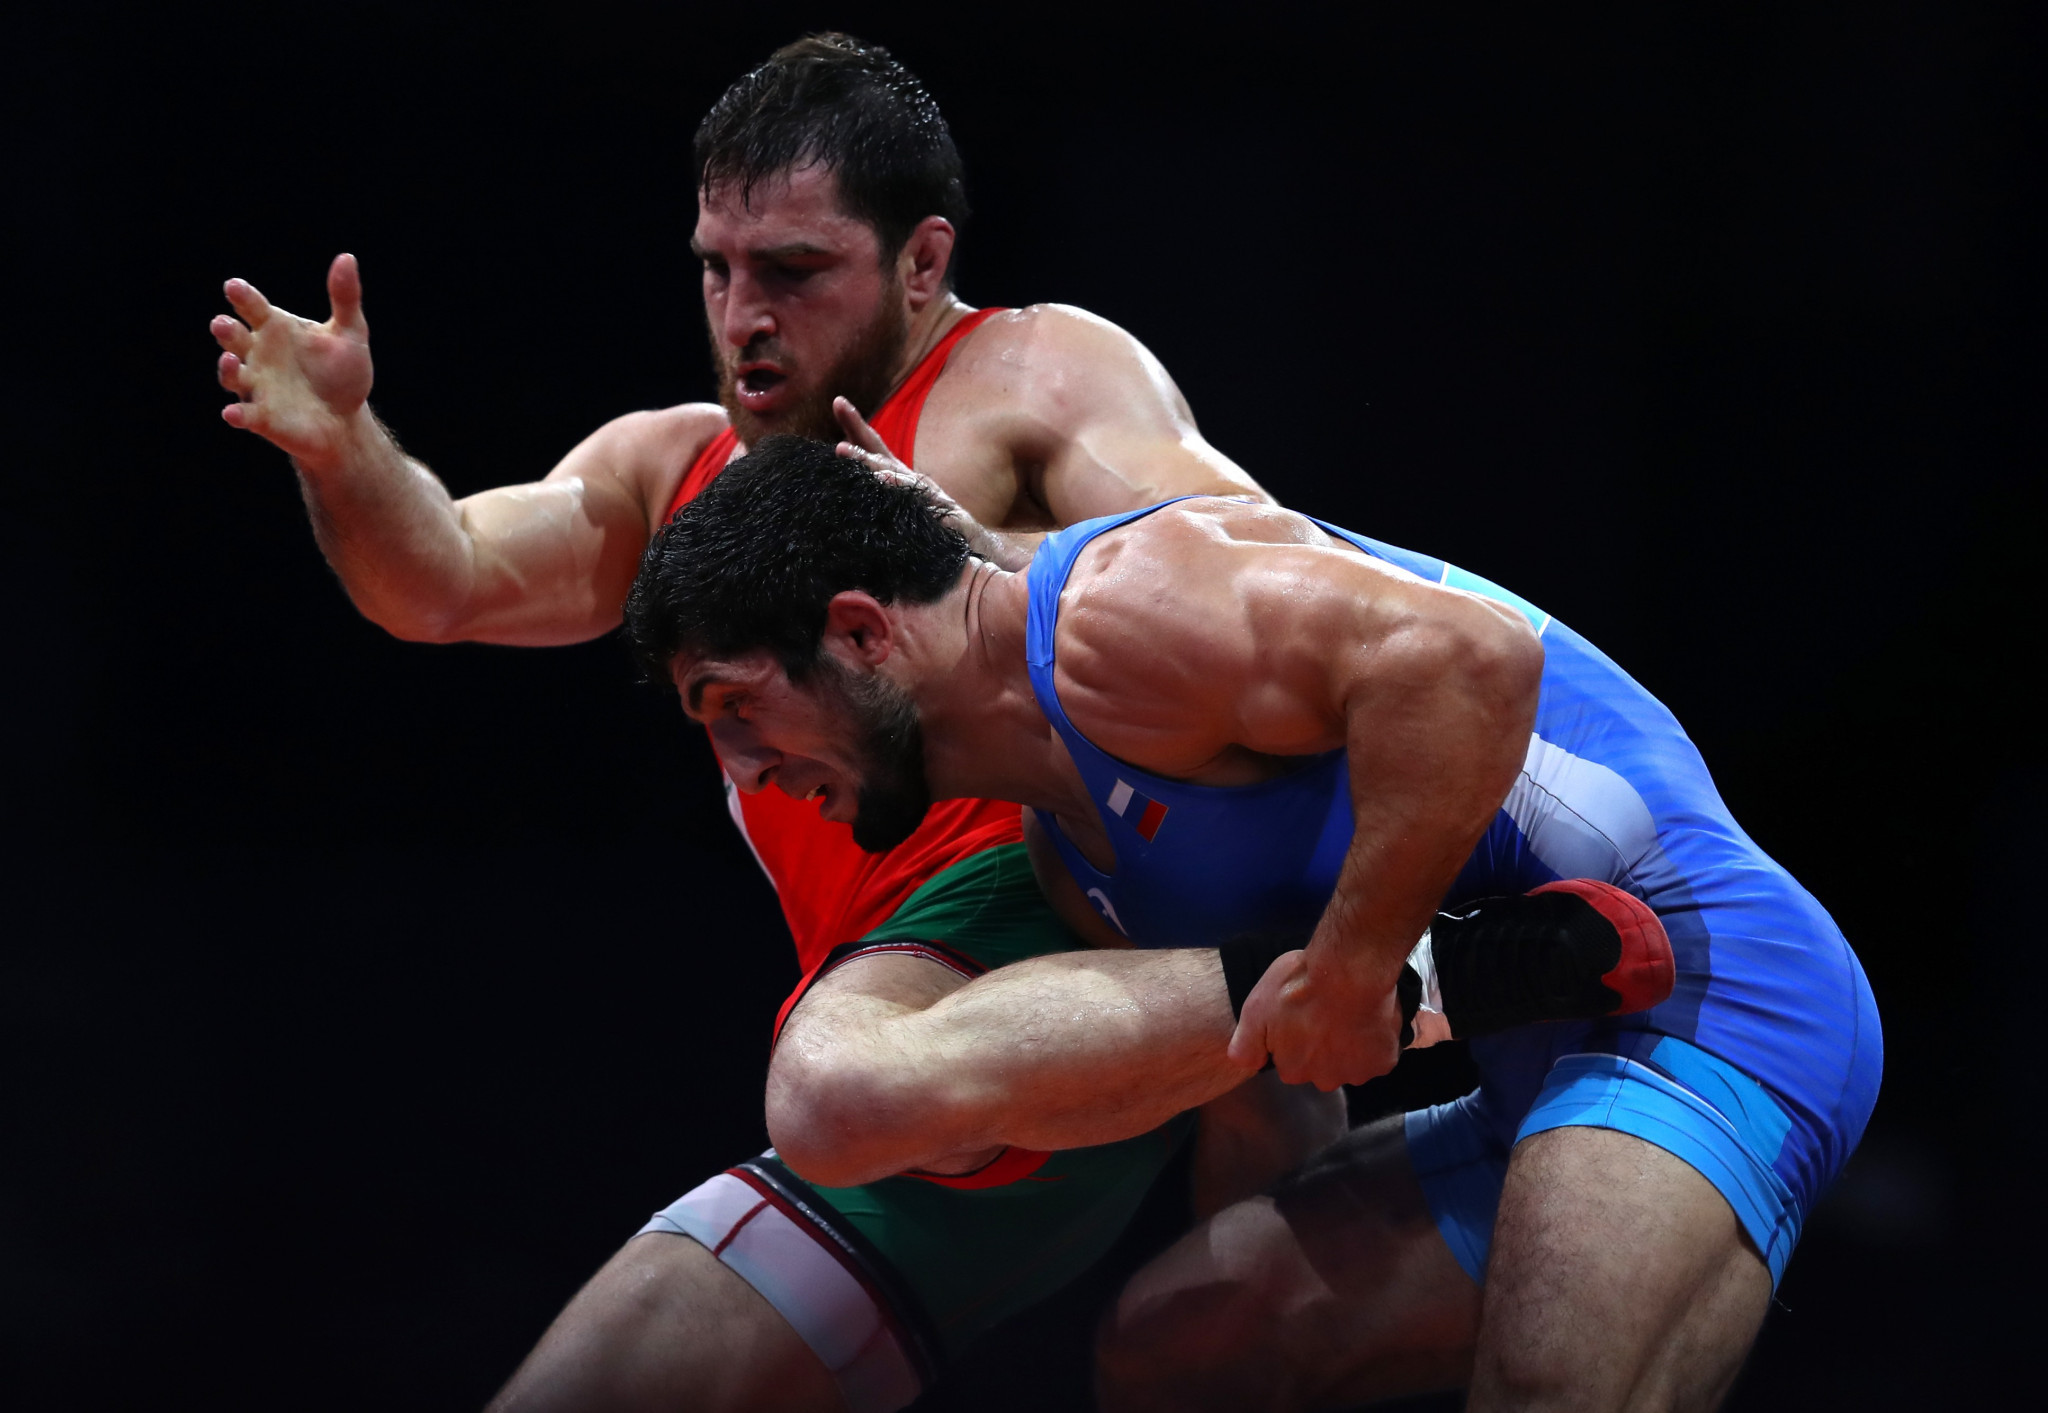 Dauren Kurugliev claimed gold at the 2017 European Championships and 2019 European Games ©Getty Images